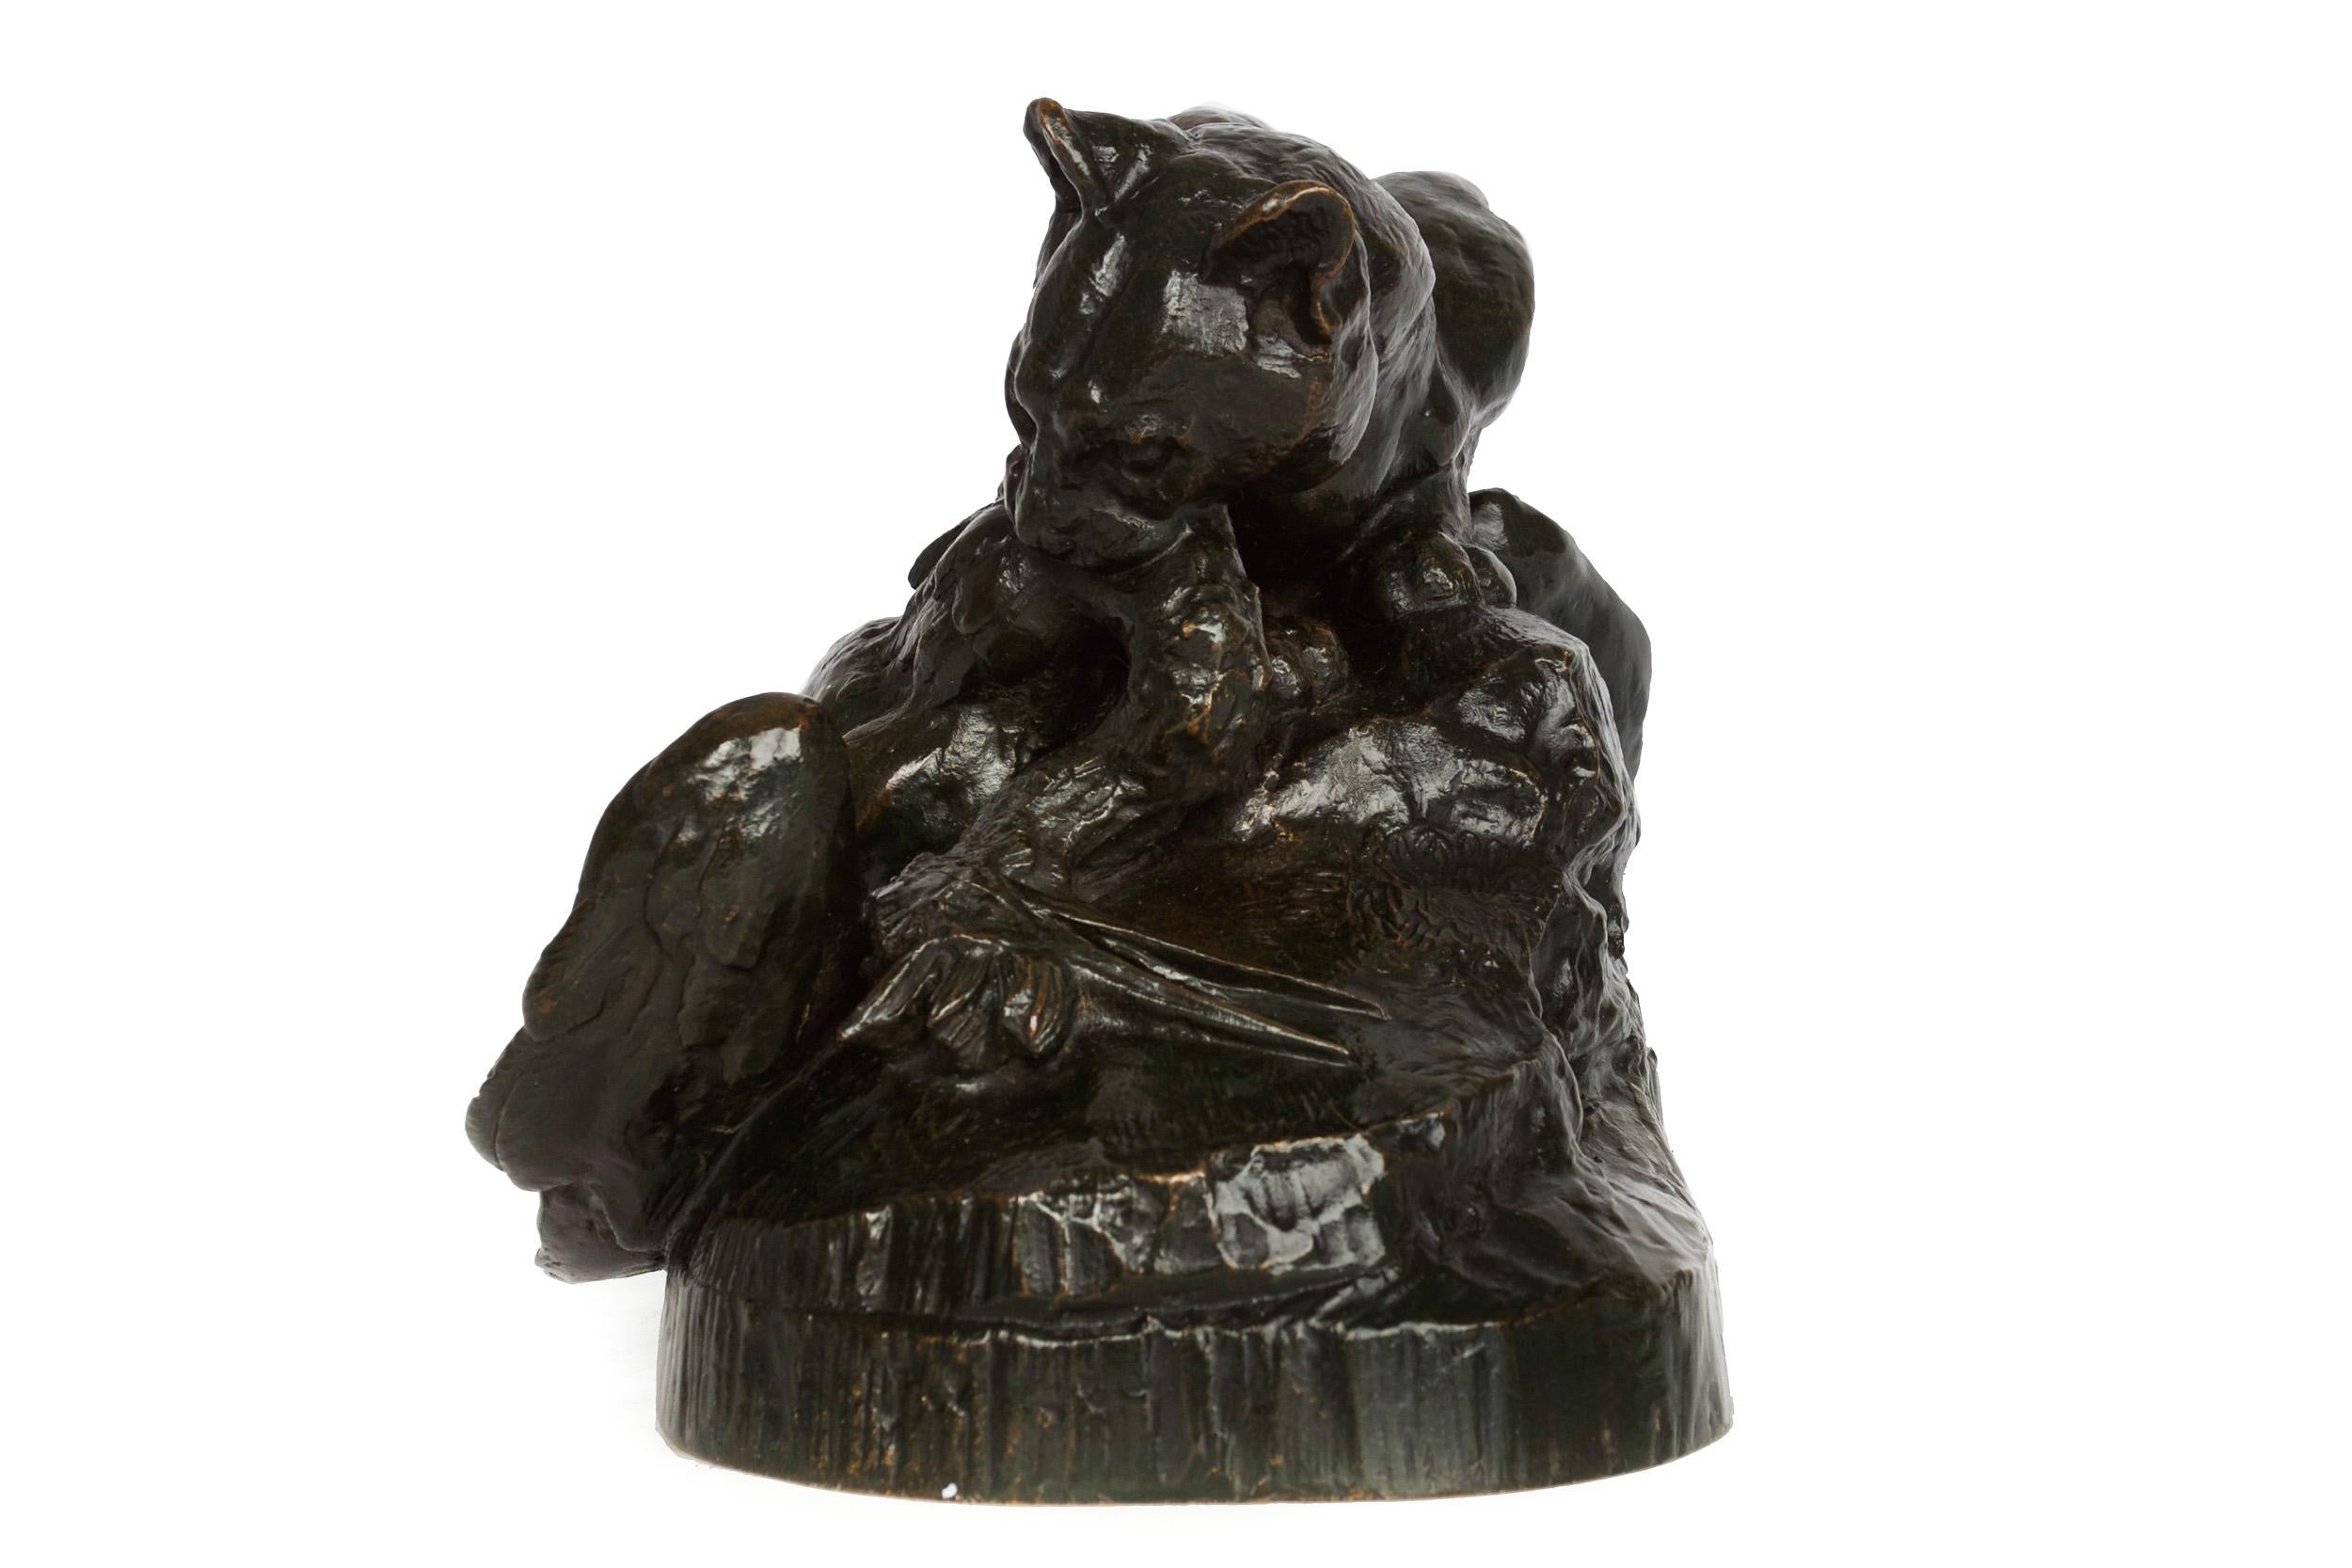 Romantic French Bronze Sculpture of Ocelot and Heron by Antoine-Louis Barye, Barbedienne